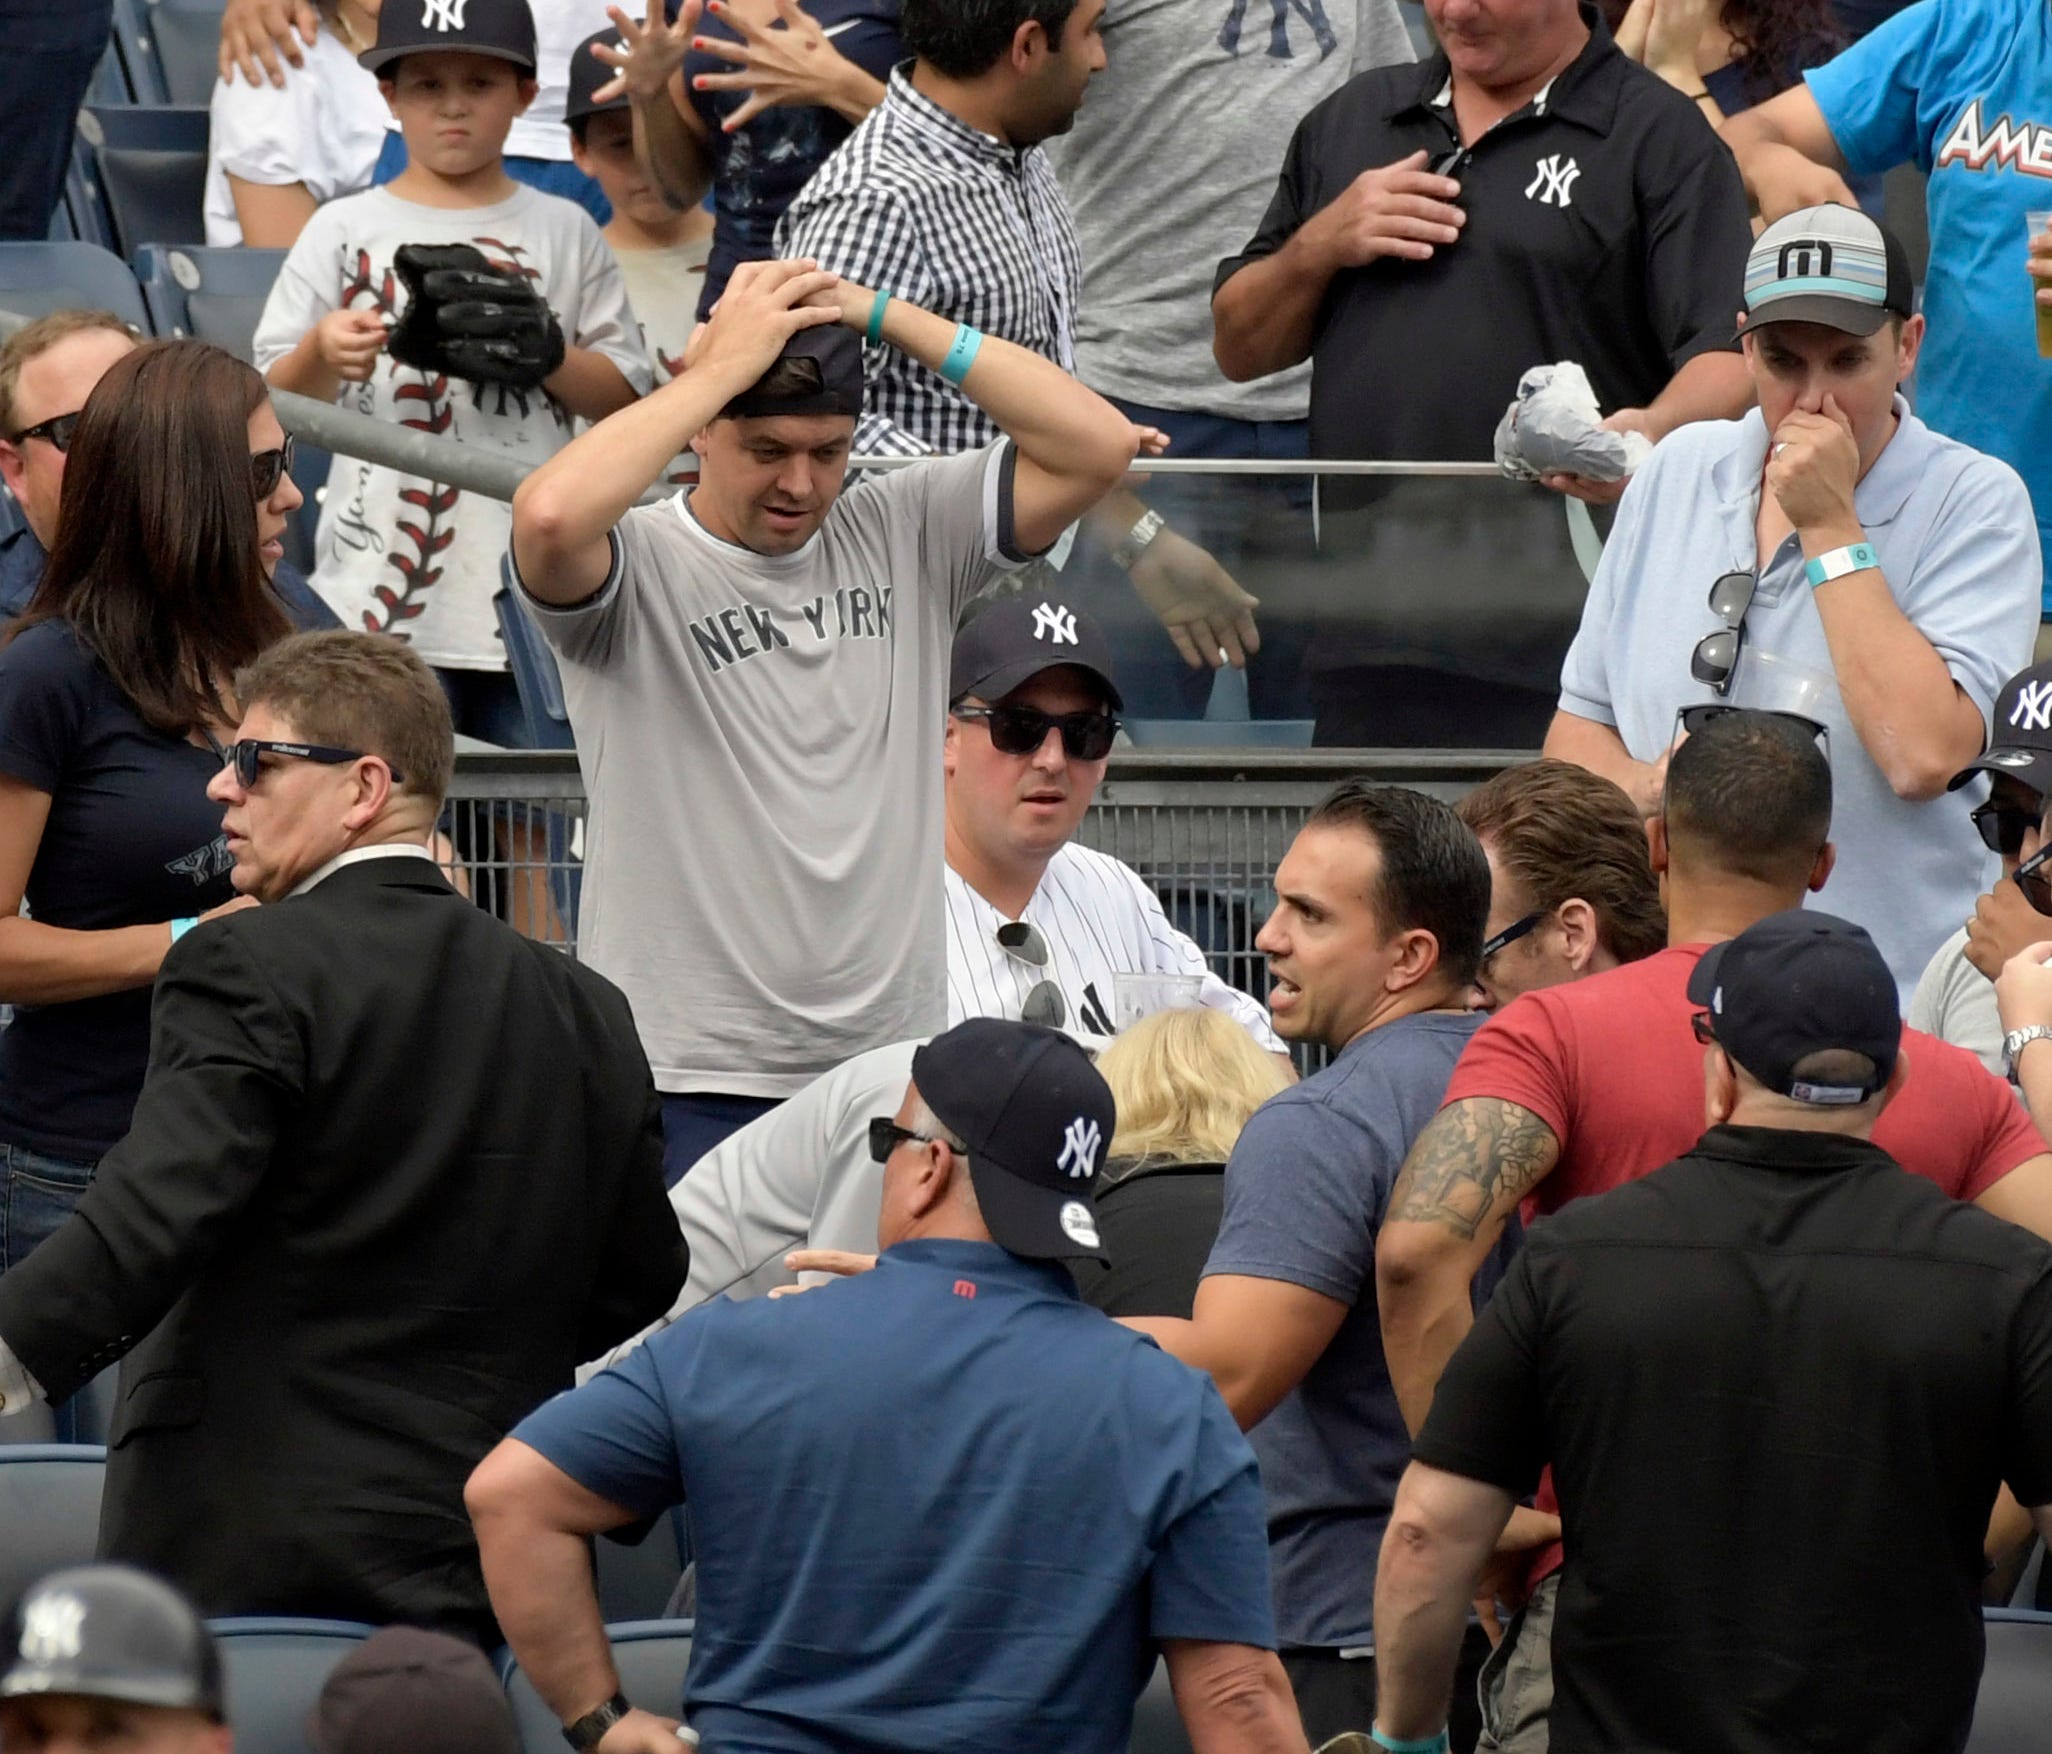 Fans react after a young girl was hit by a line drive.